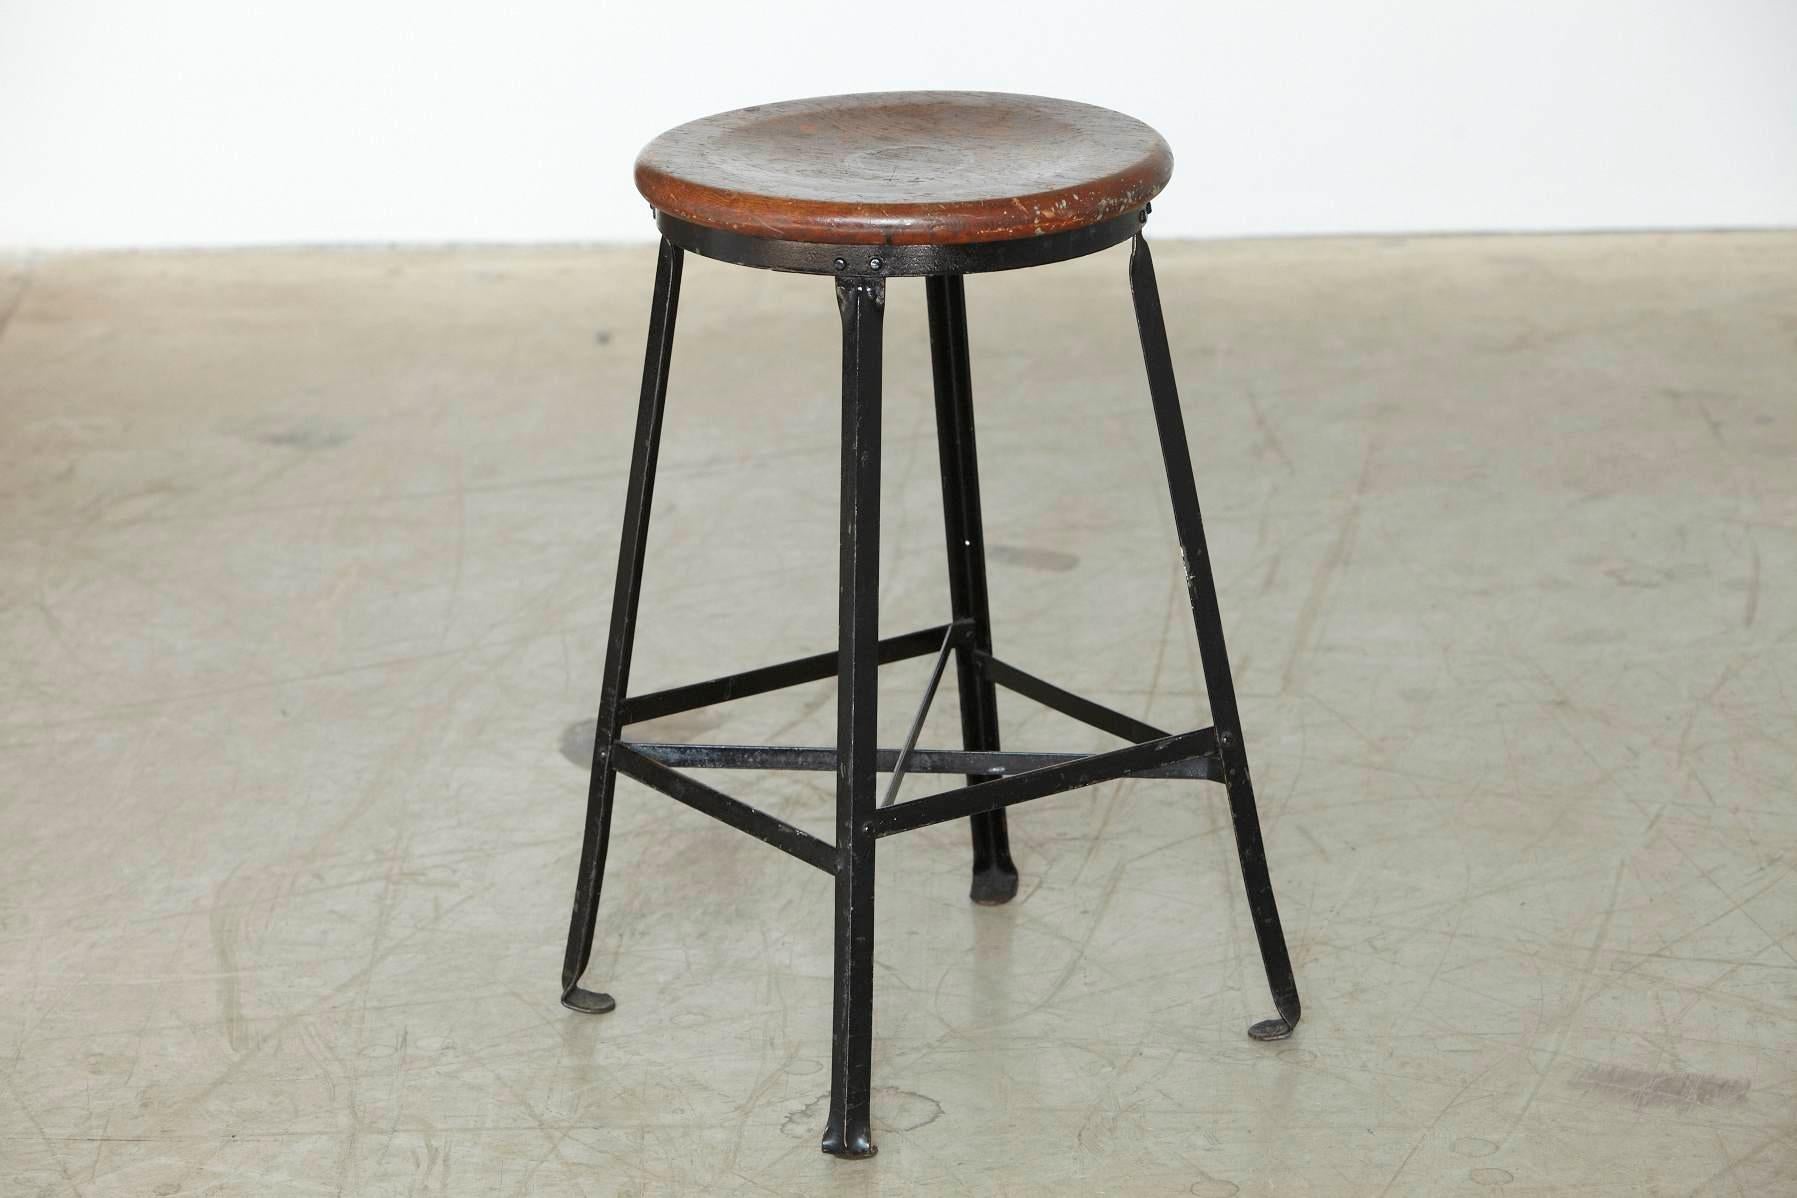 Great looking black painted industrial stool with steel frame and round oak seat in it's original condition with nice patina, circa 1940s.
Strong and solid construction.
Measurements: W 15.5 x D 15.5 x H 24.75 - seat diameter 14, all inches.